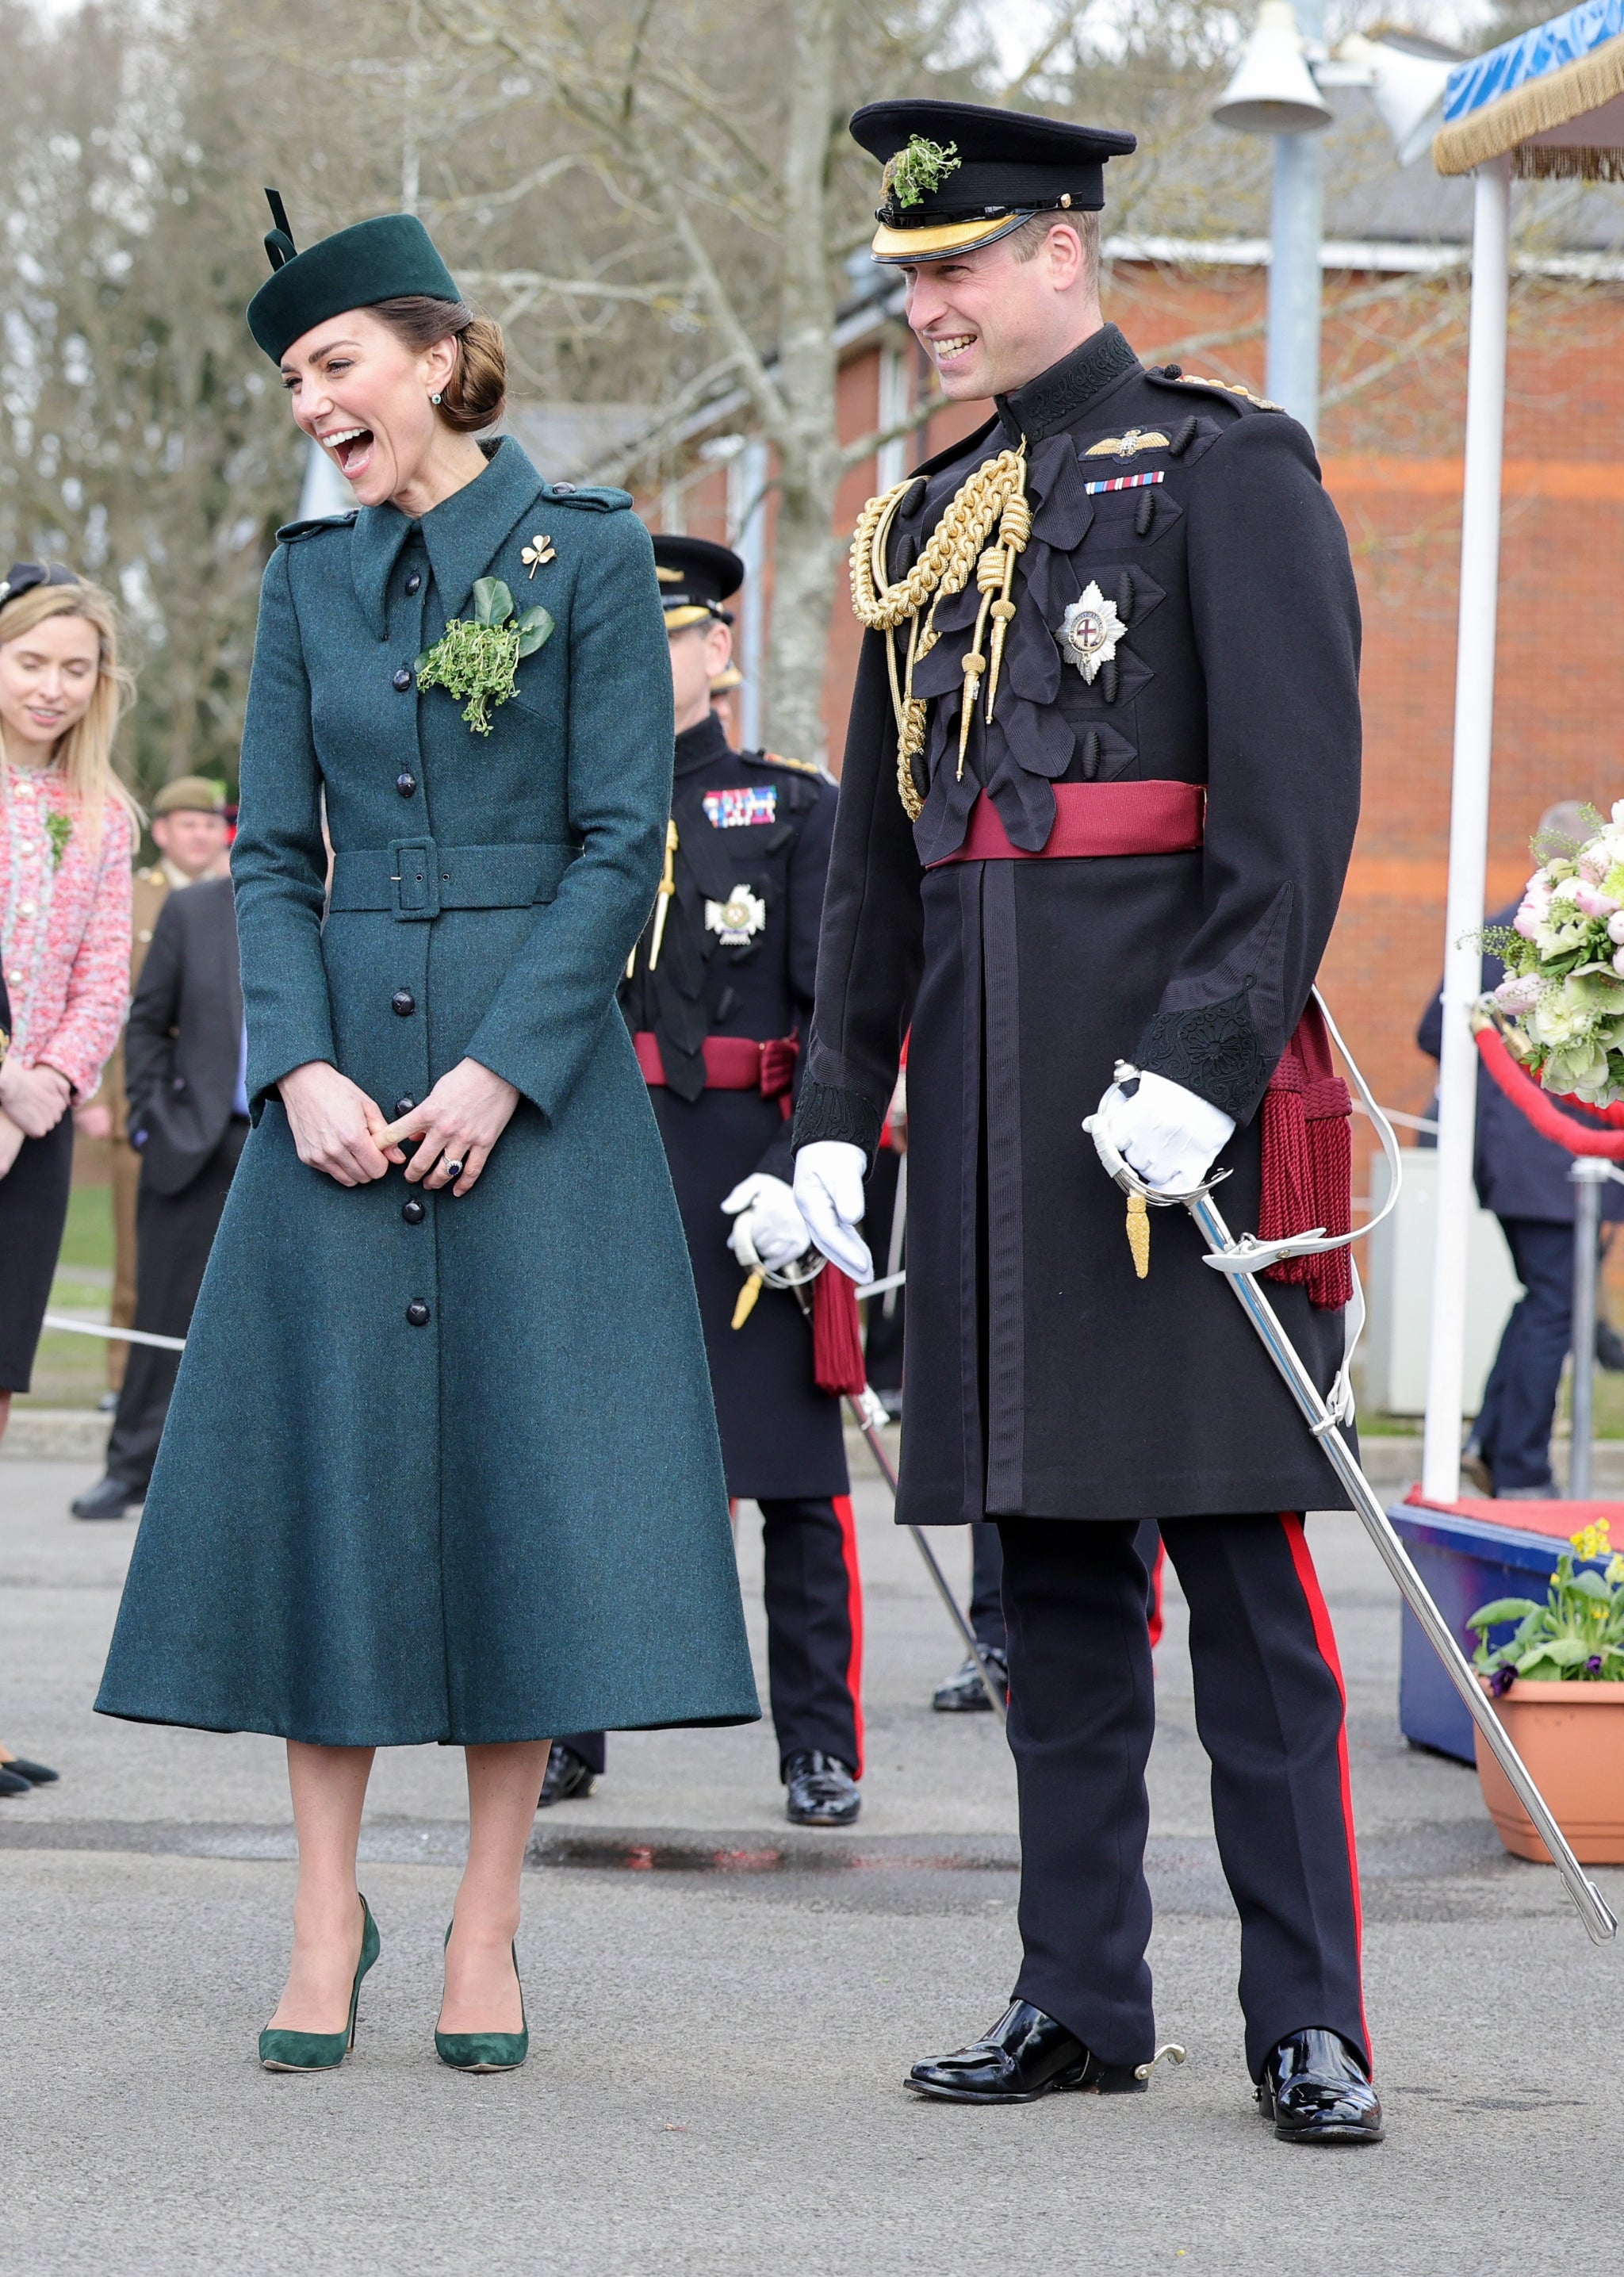 The Duke and Duchess of Cambridge attend the 1st Battalion Irish Guards’ St. Patrick’s Day Parade at Mons Barracks on March 17, 2022 in Aldershot, England